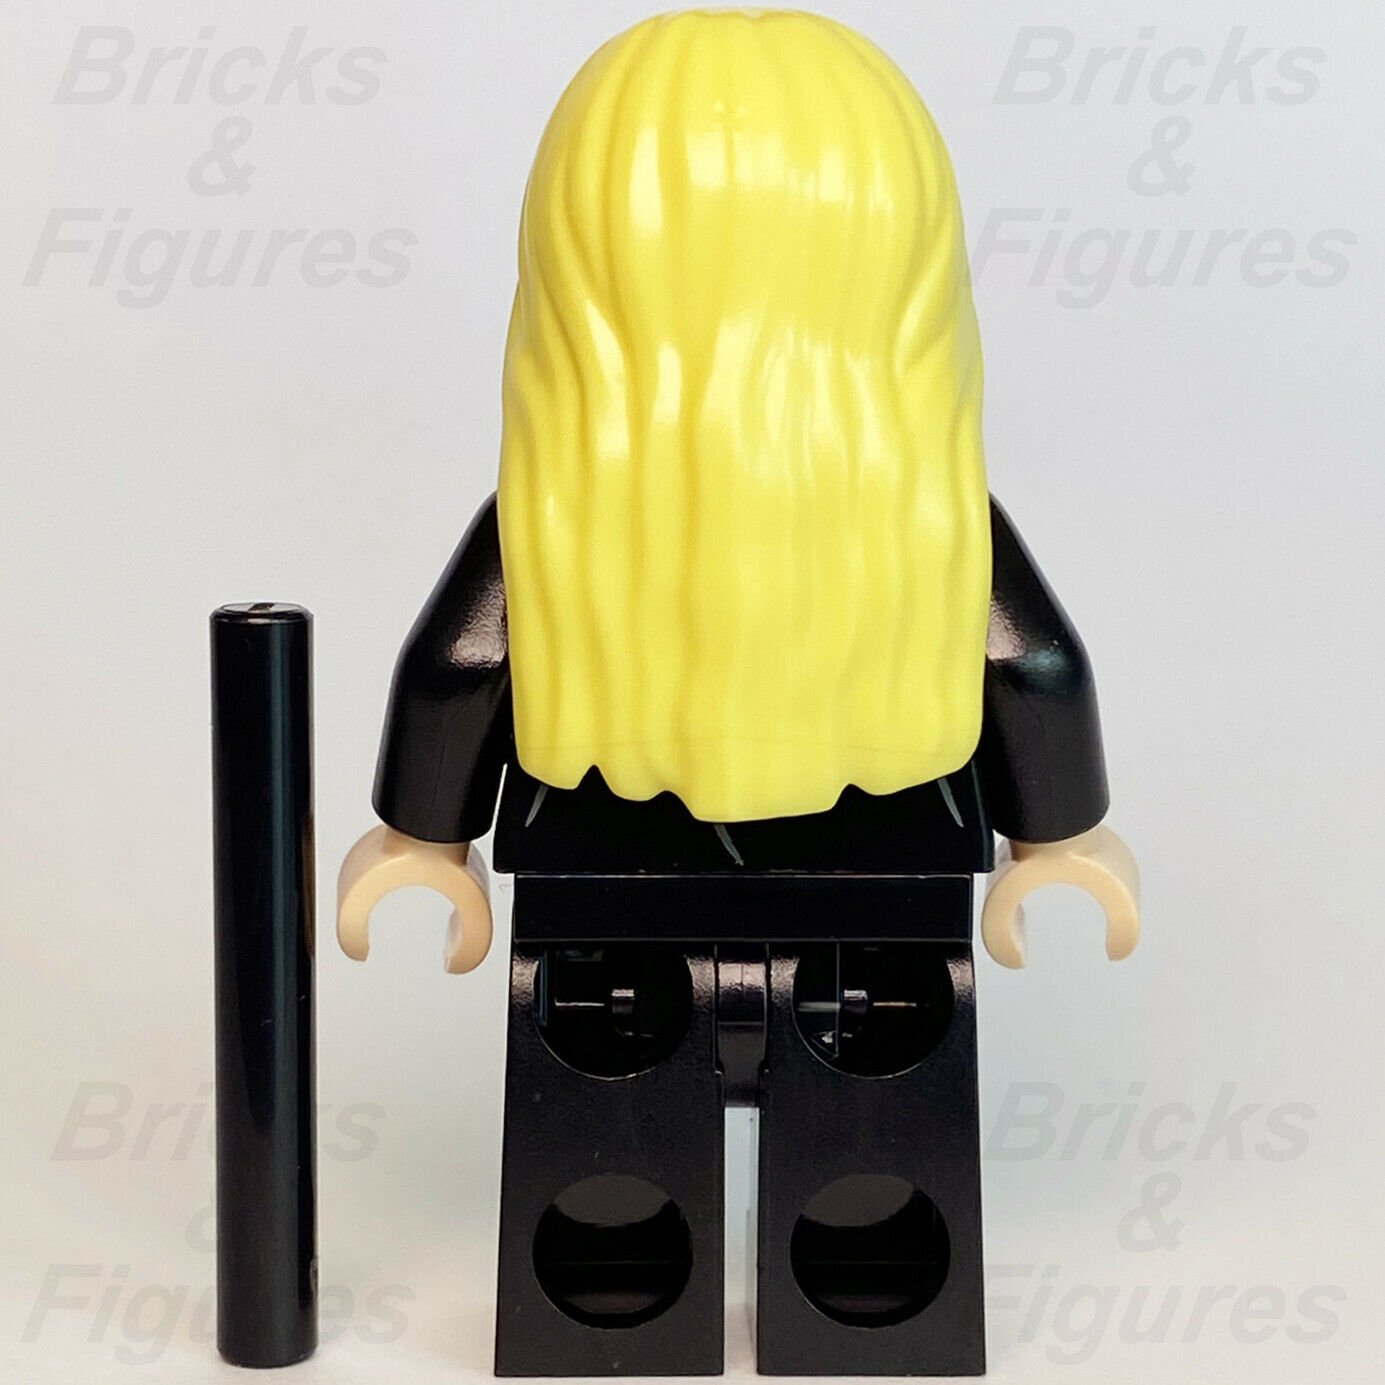 New Harry Potter LEGO Lucius Malfoy Death Eater Wizard Minifigure 75978 hp255 - Bricks & Figures